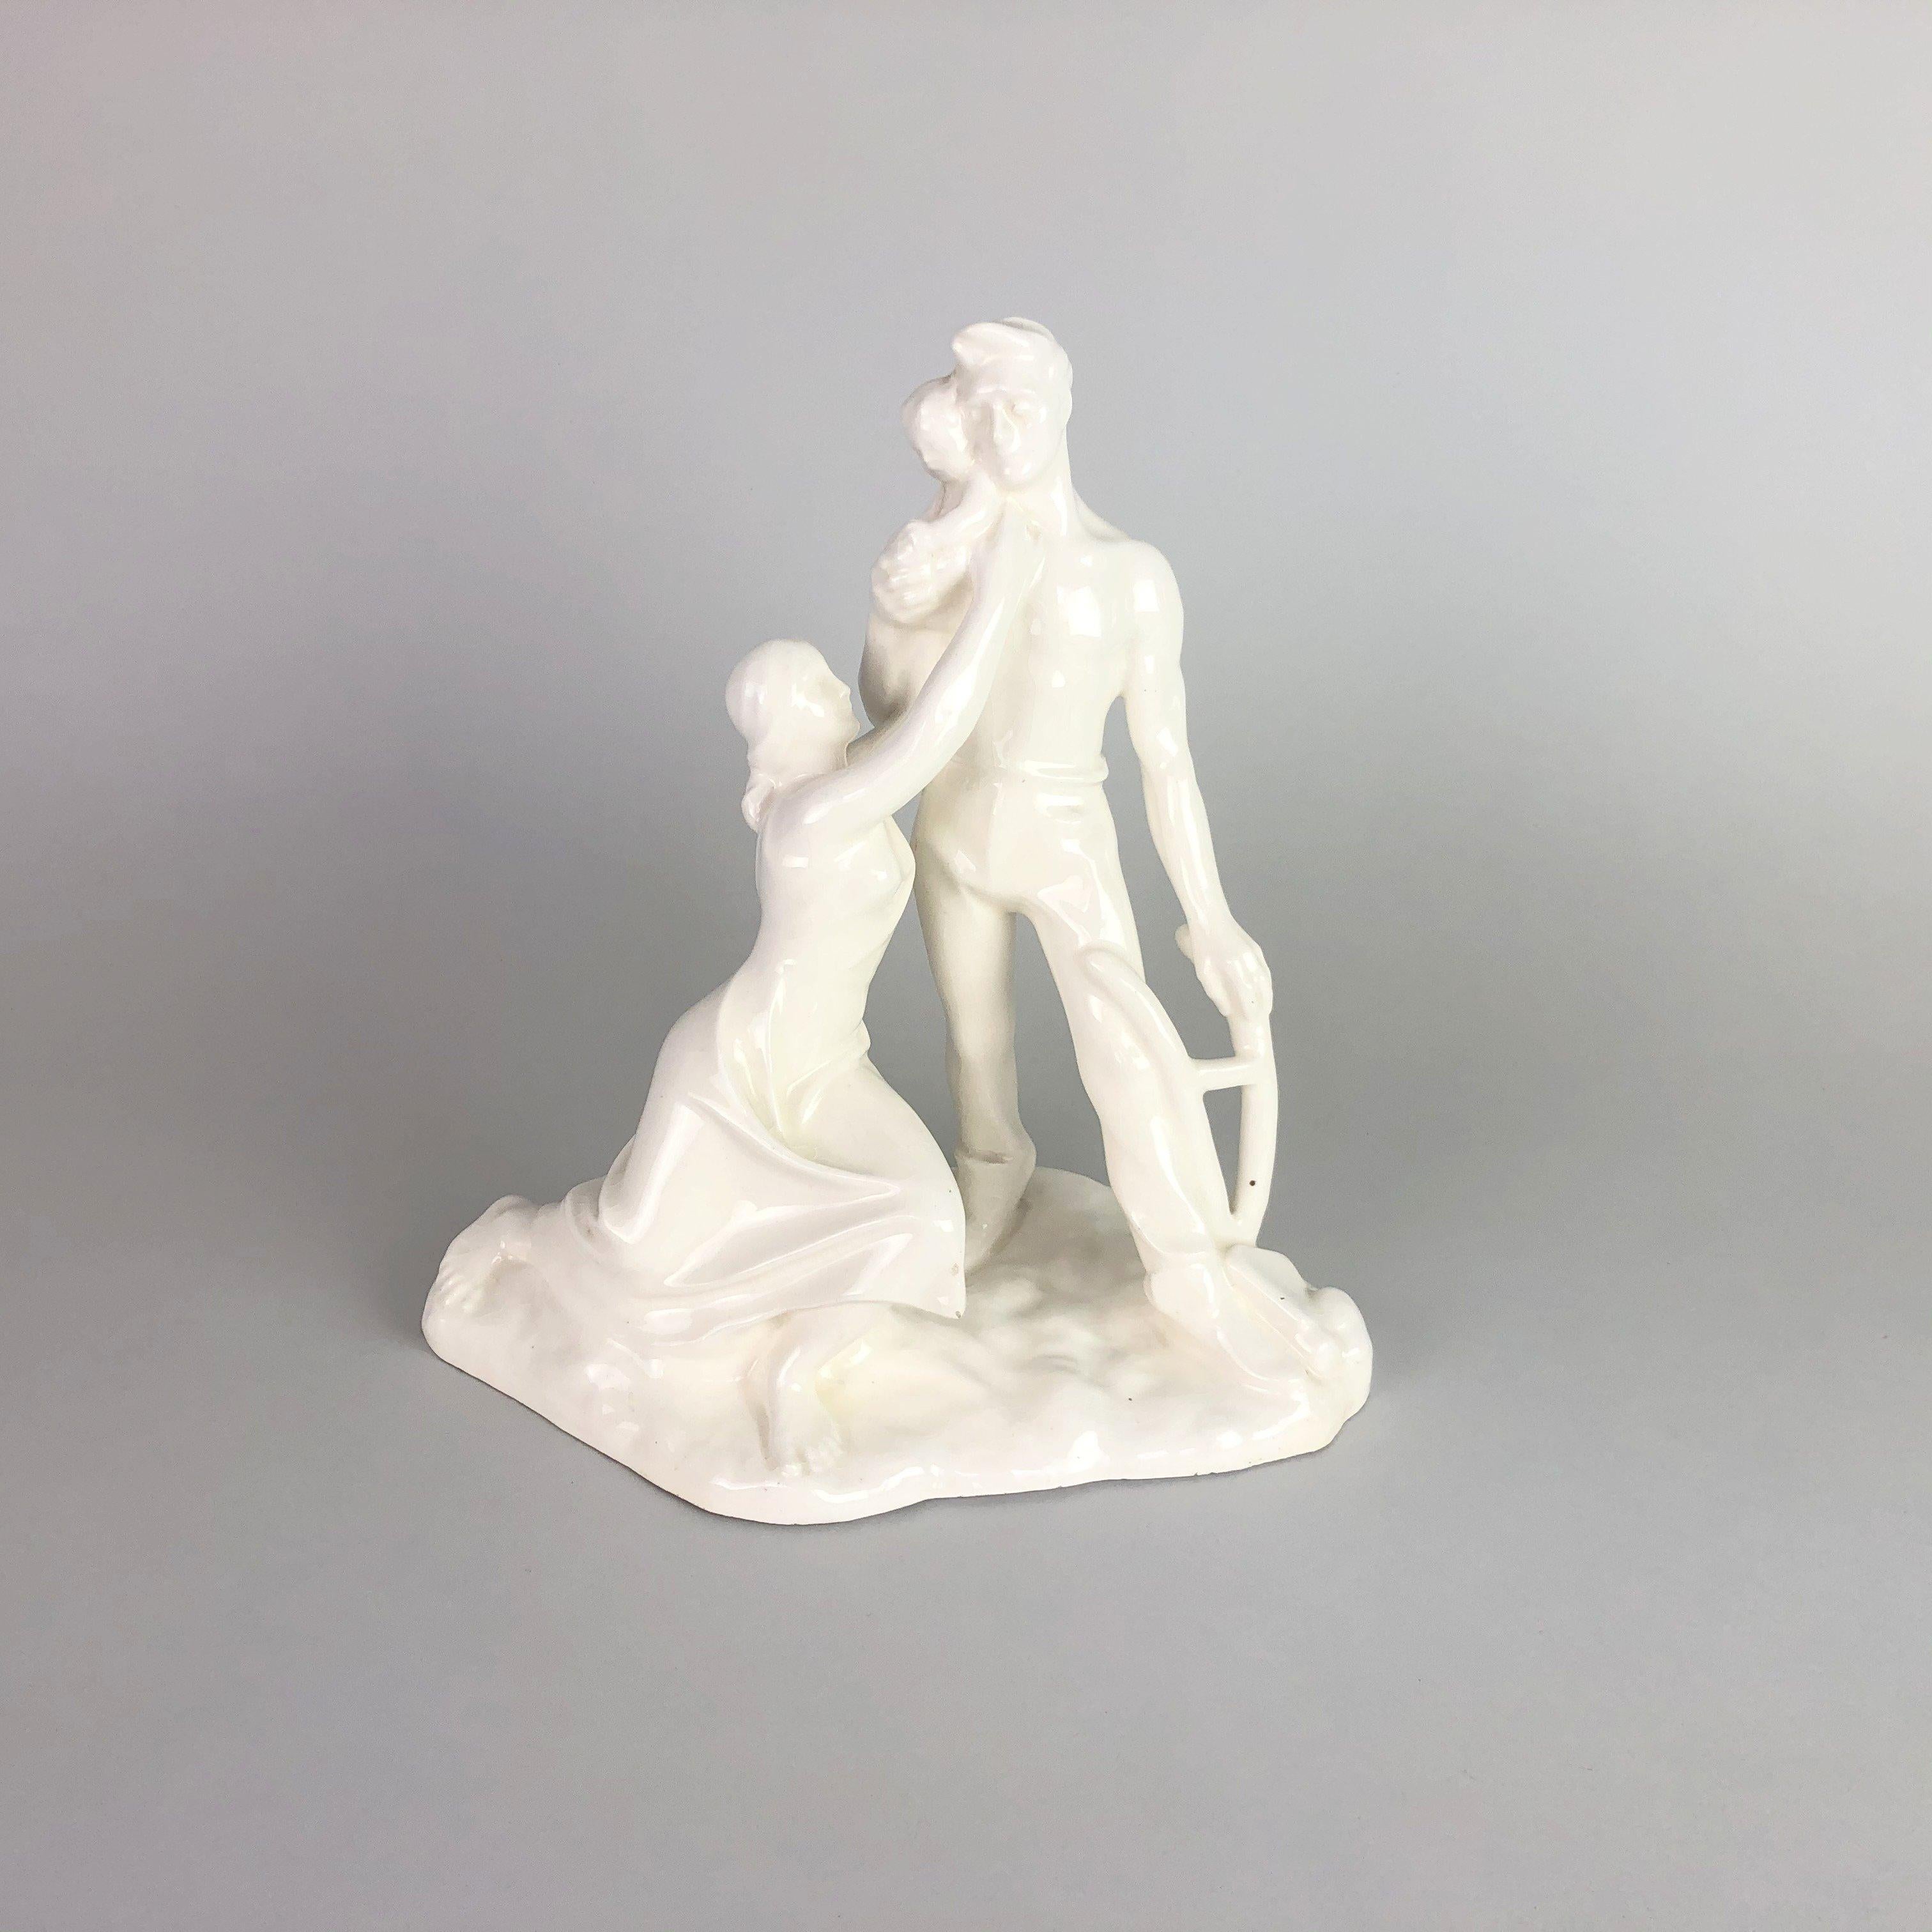 Vintage glazed ceramic sculpture of a young family. Signed by the author „Emil Hlavica Brno